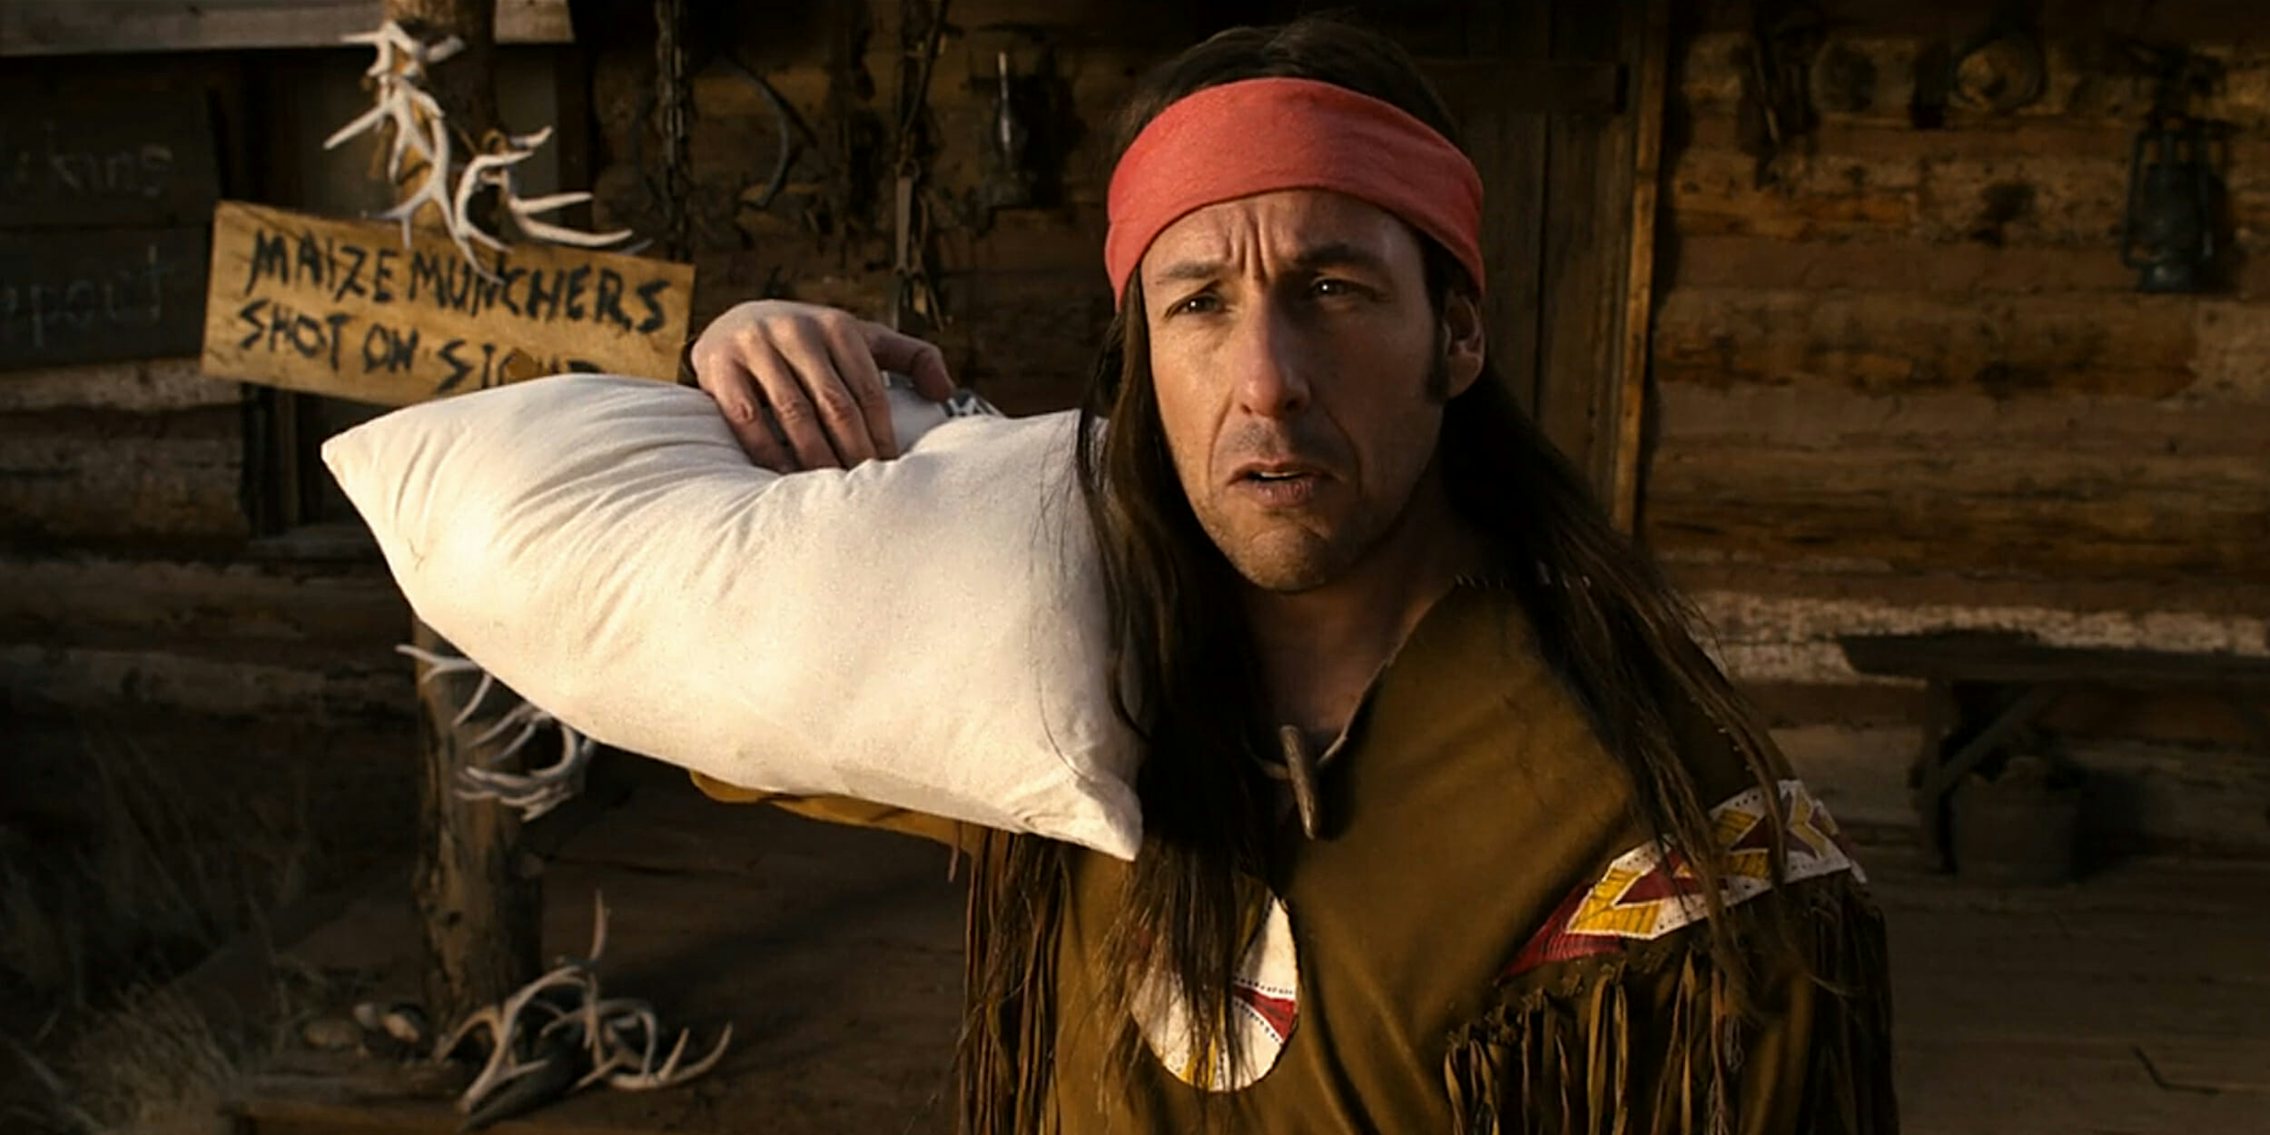 worst netflix movies - Adam Sandler dressed as a Native American in The Ridiculous 6